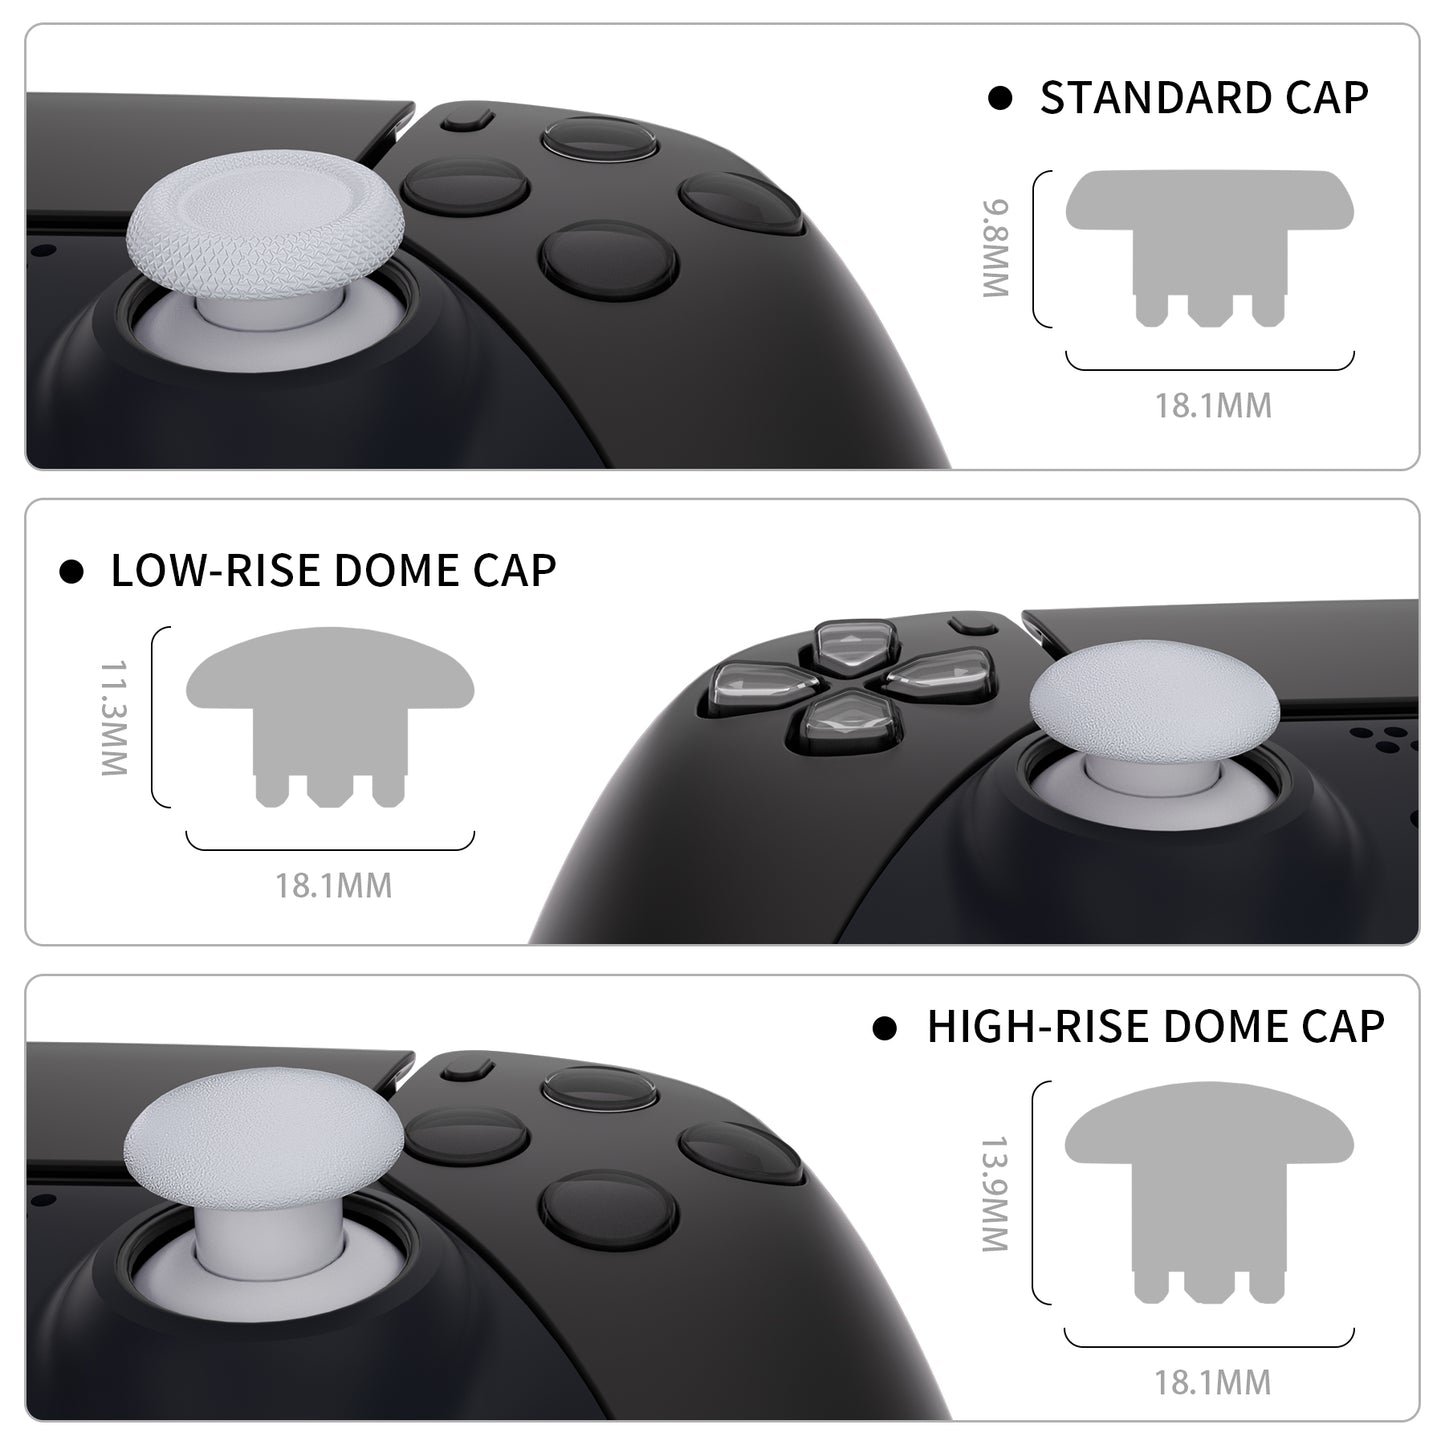 EDGE Sticks Replacement Interchangeable Thumbsticks for PS5 & PS4 All Model Controllers - Solid White eXtremeRate